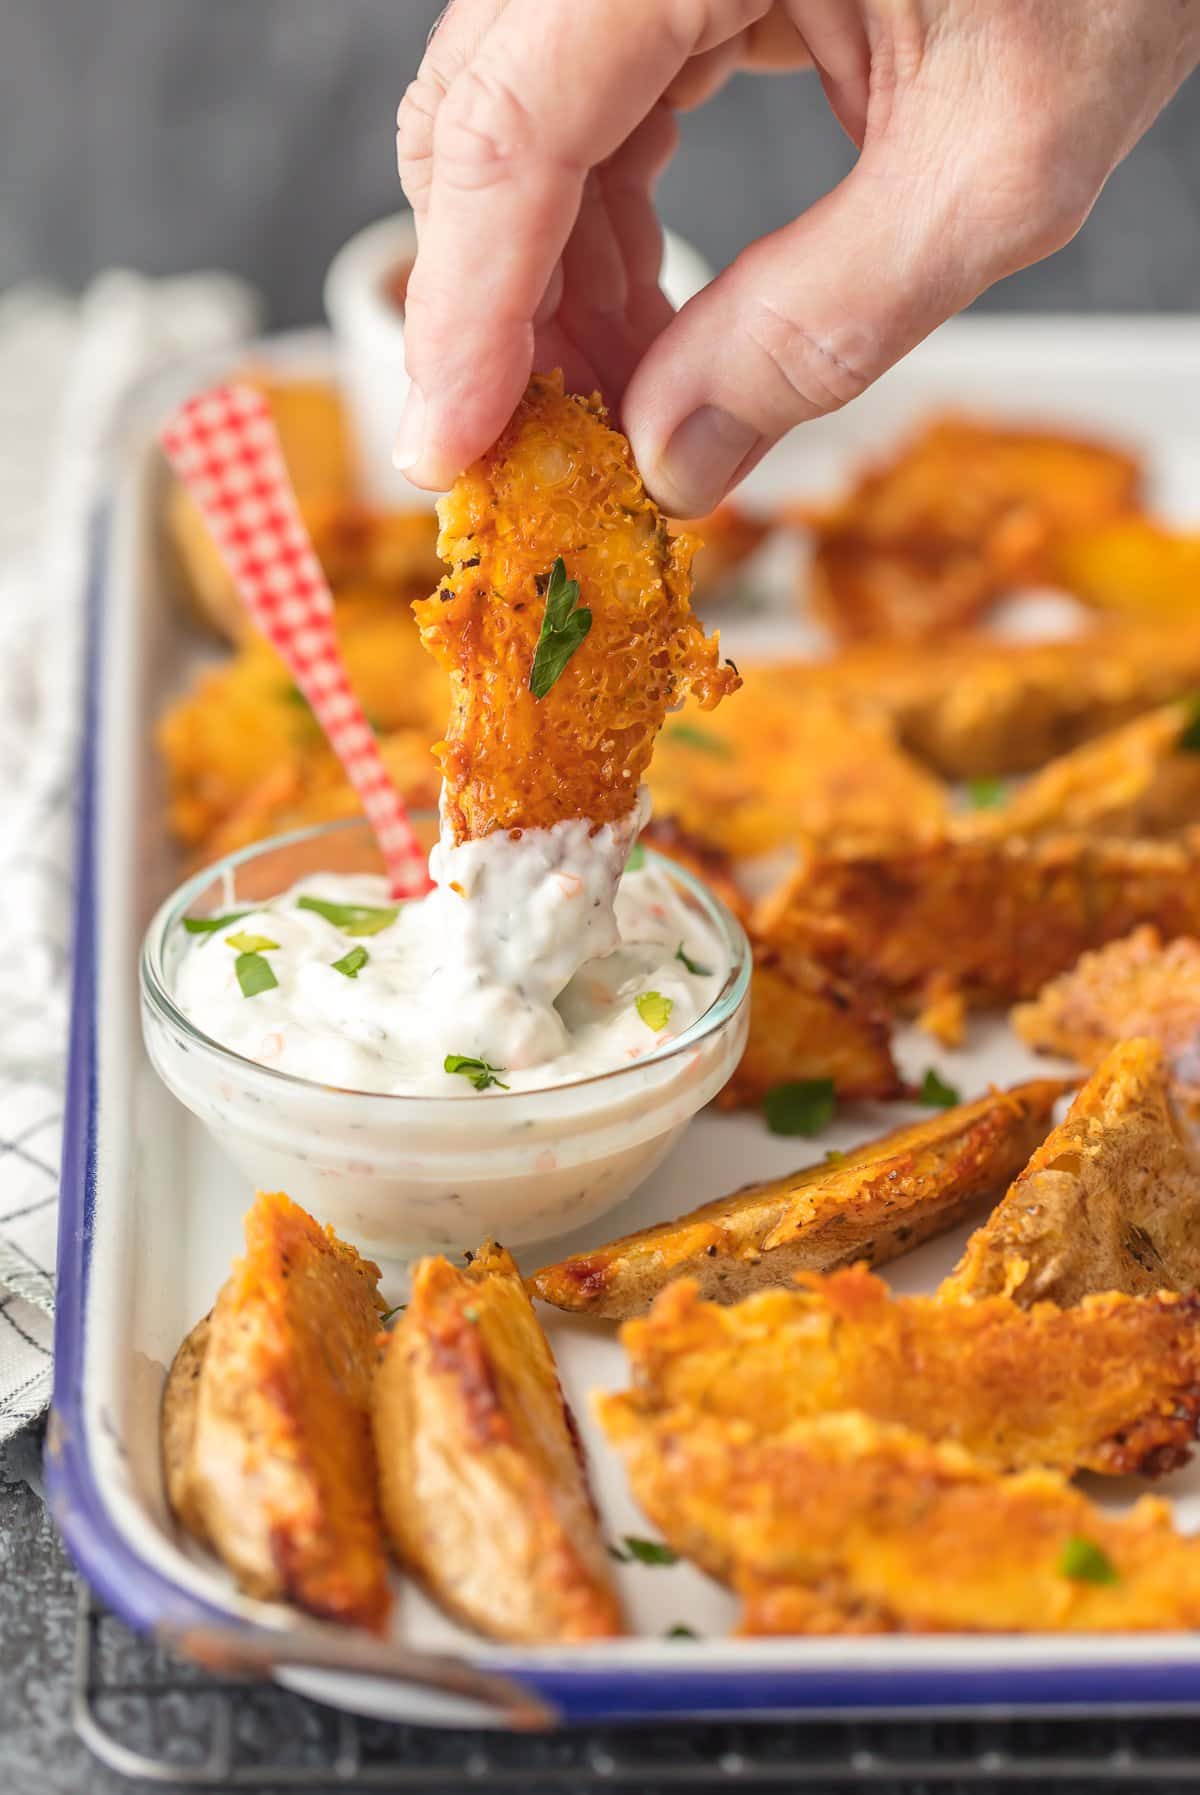 Dipping crispy potato wedges into dipping sauce